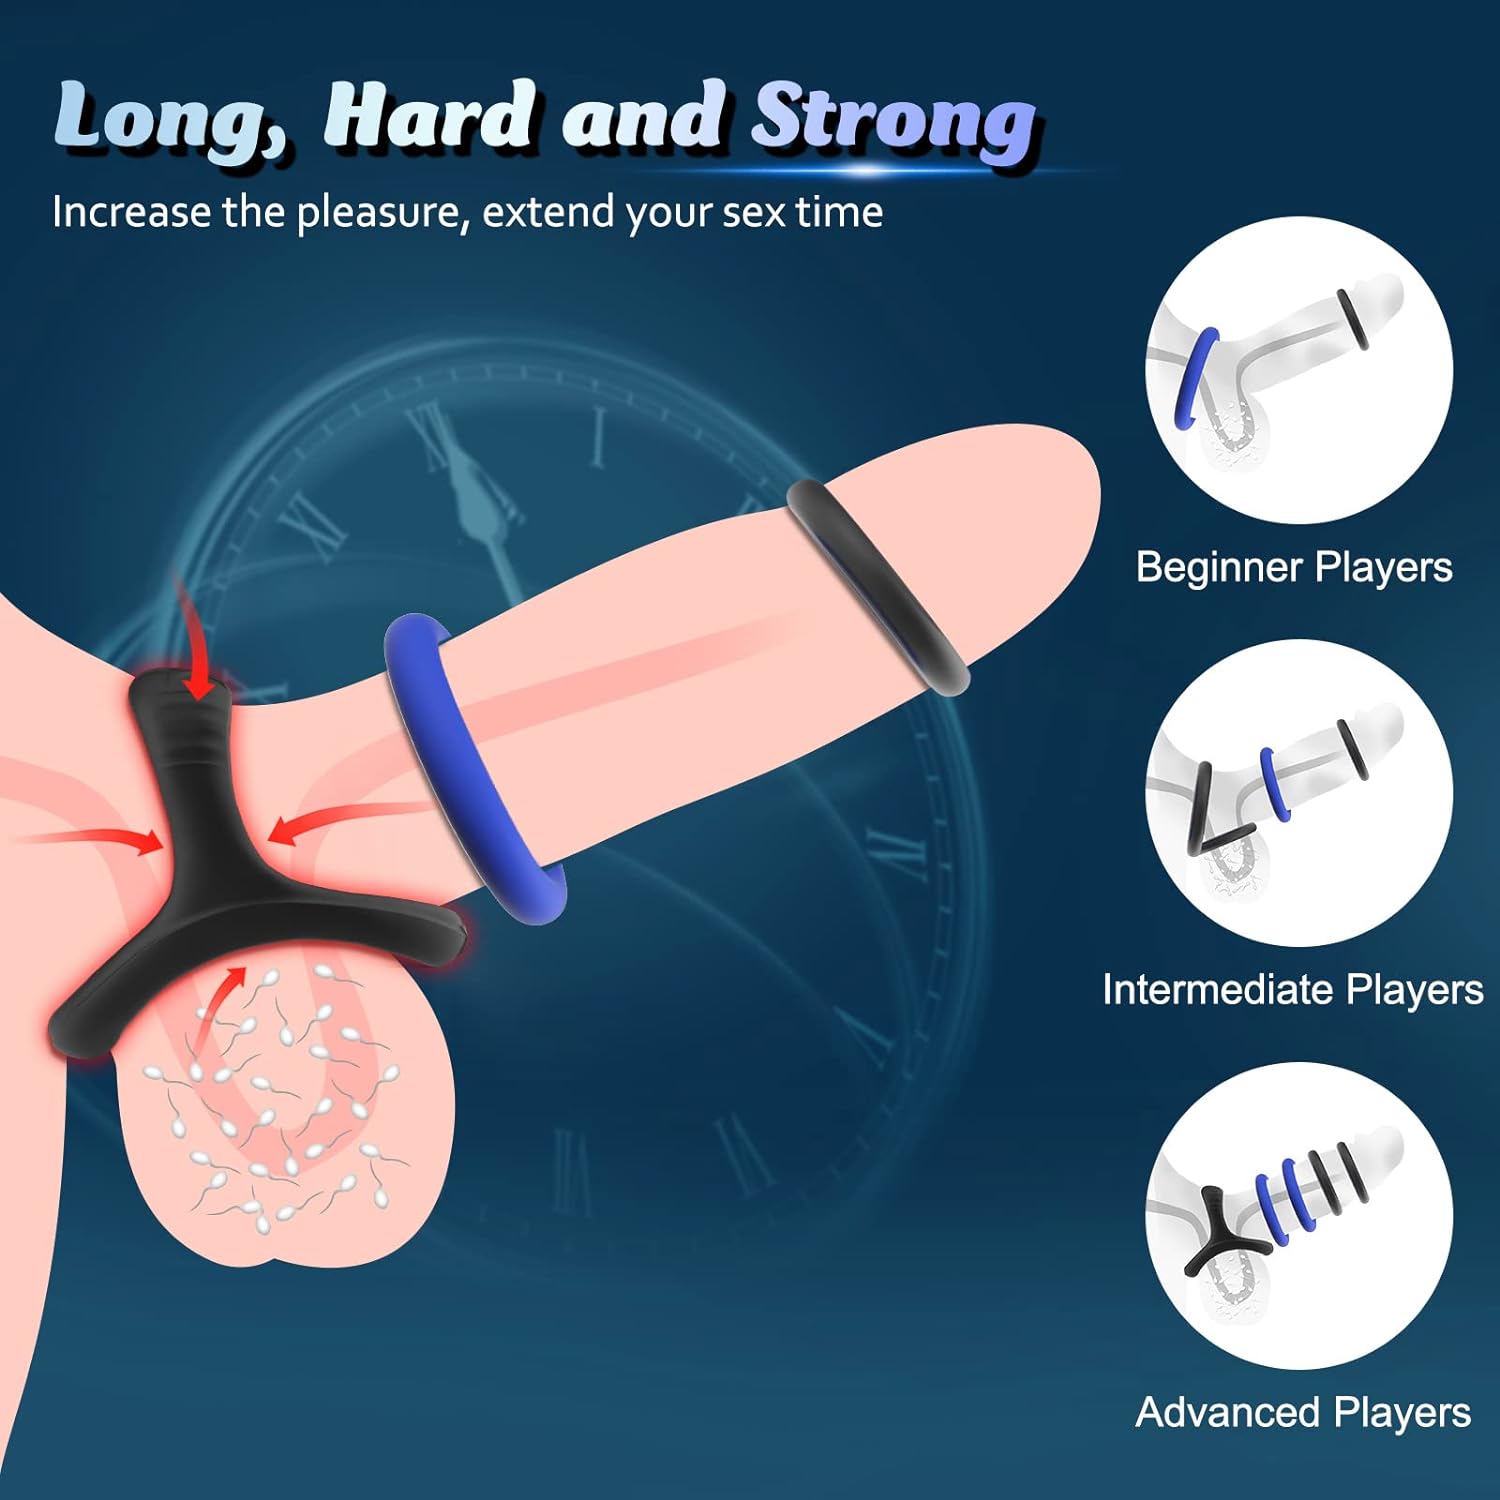 Linsecn 8 PCS Cock Ring Set Penis Ring, Silicone Cock Penis Rings for Penis Erection Enhancing and Sex Longer Lasting Stronger, Male Dildo Stretchy Adult Sex Toys Games for Men Women Couples Pleasure